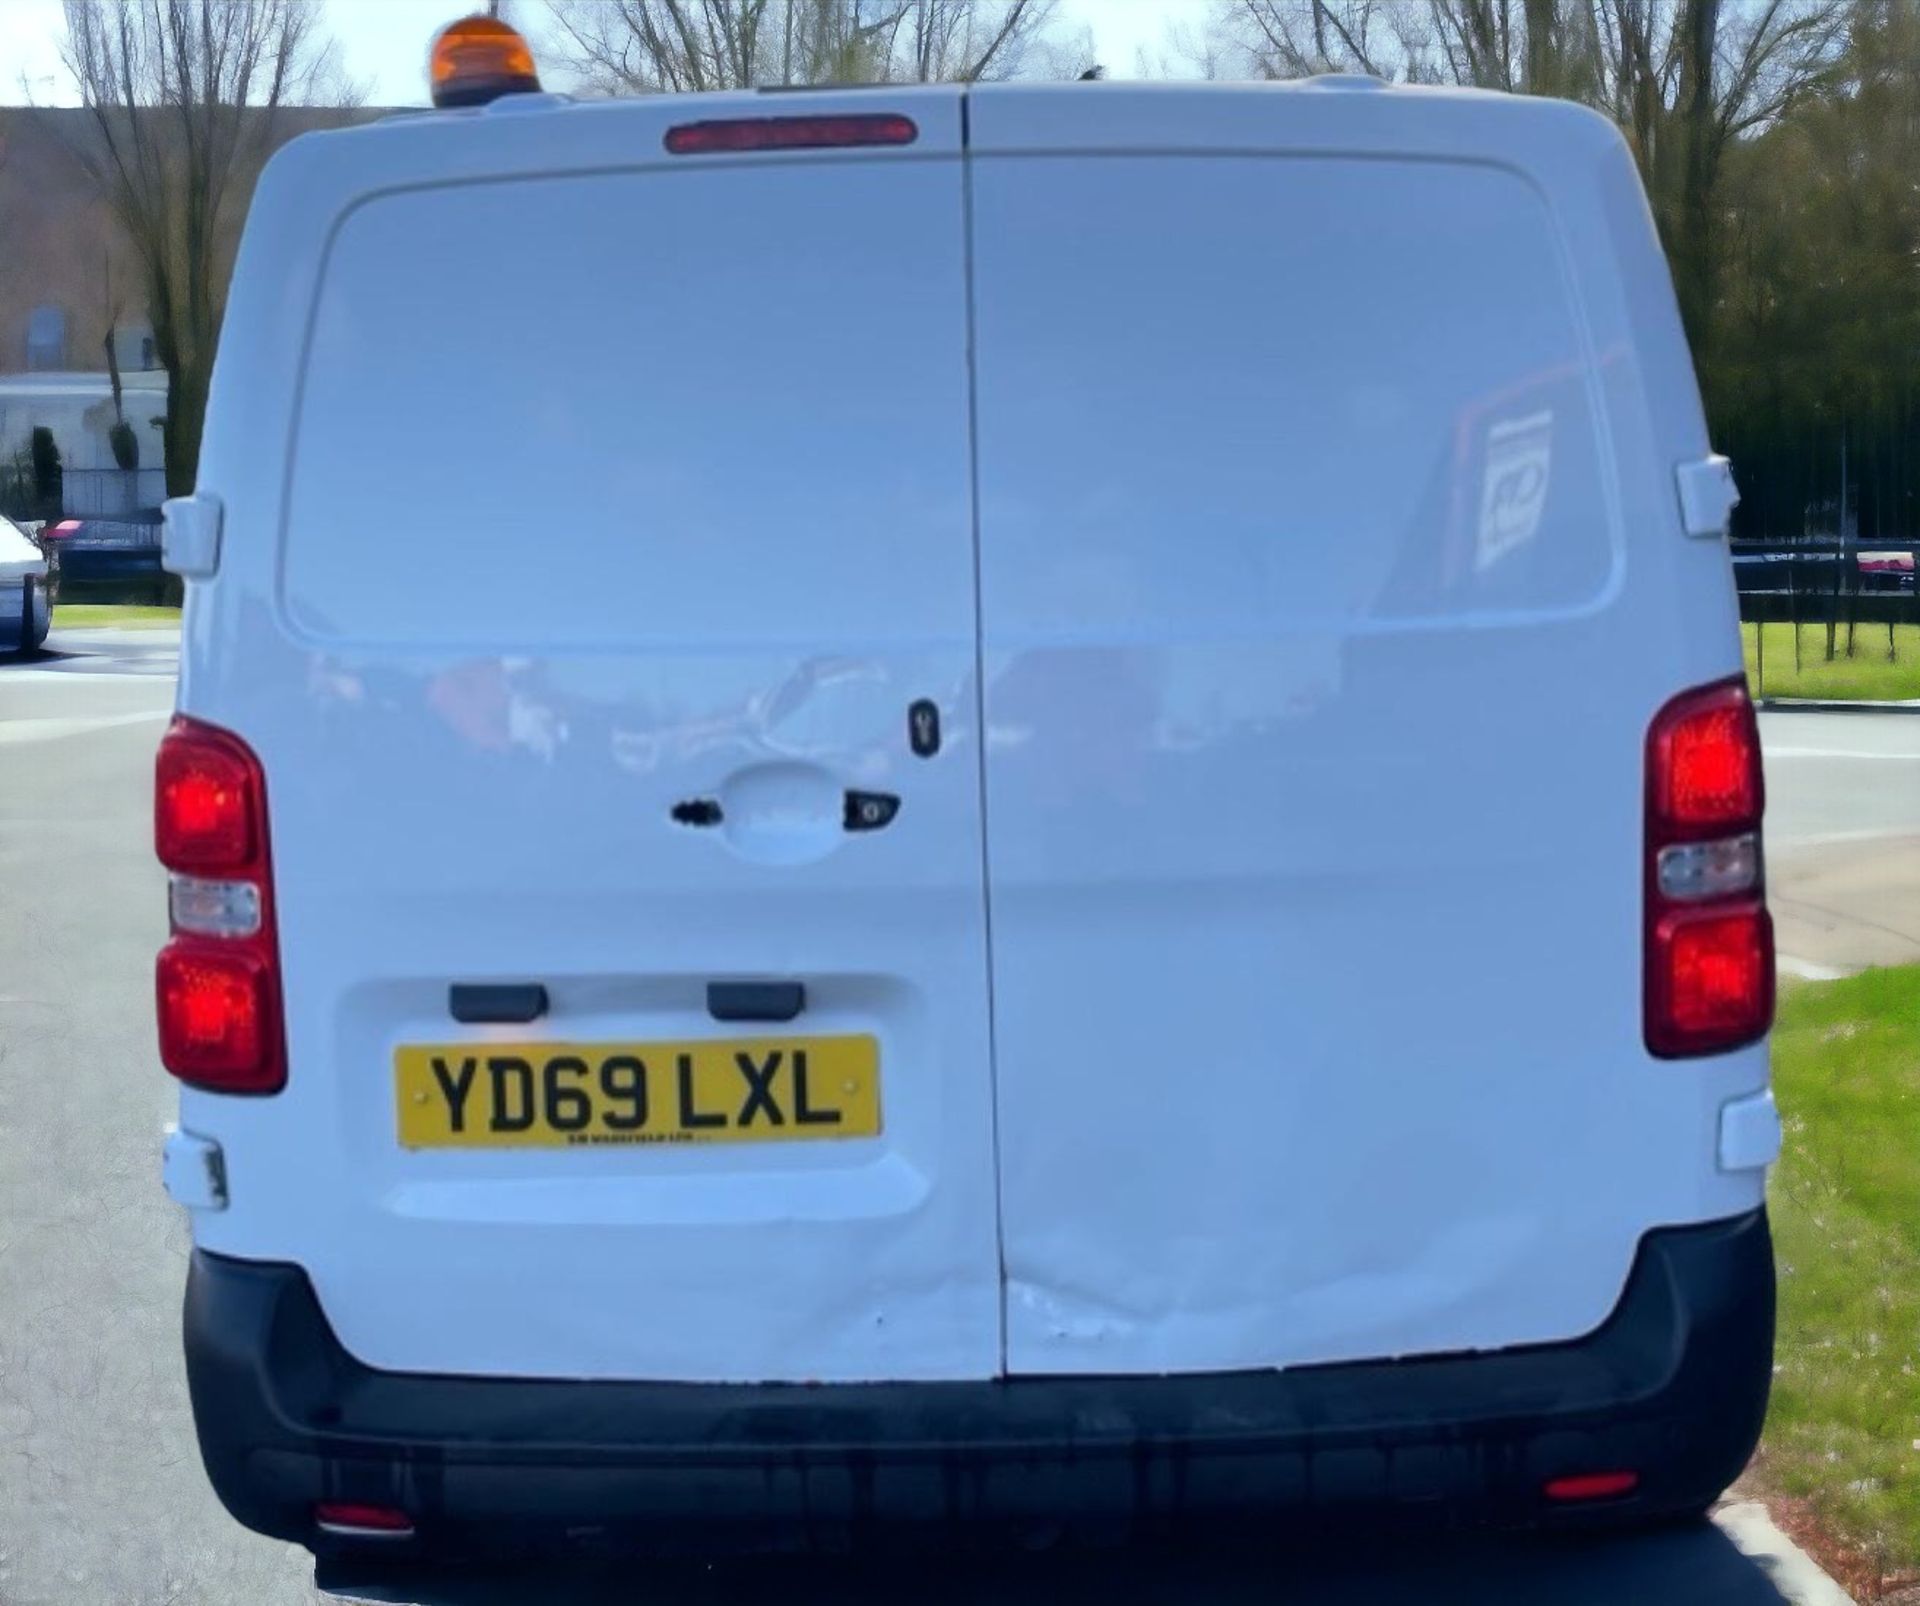 2019-69 REG CITROEN DISPATCH XS 1000 L1H1 - HPI CLEAR - READY TO GO! - Image 4 of 12